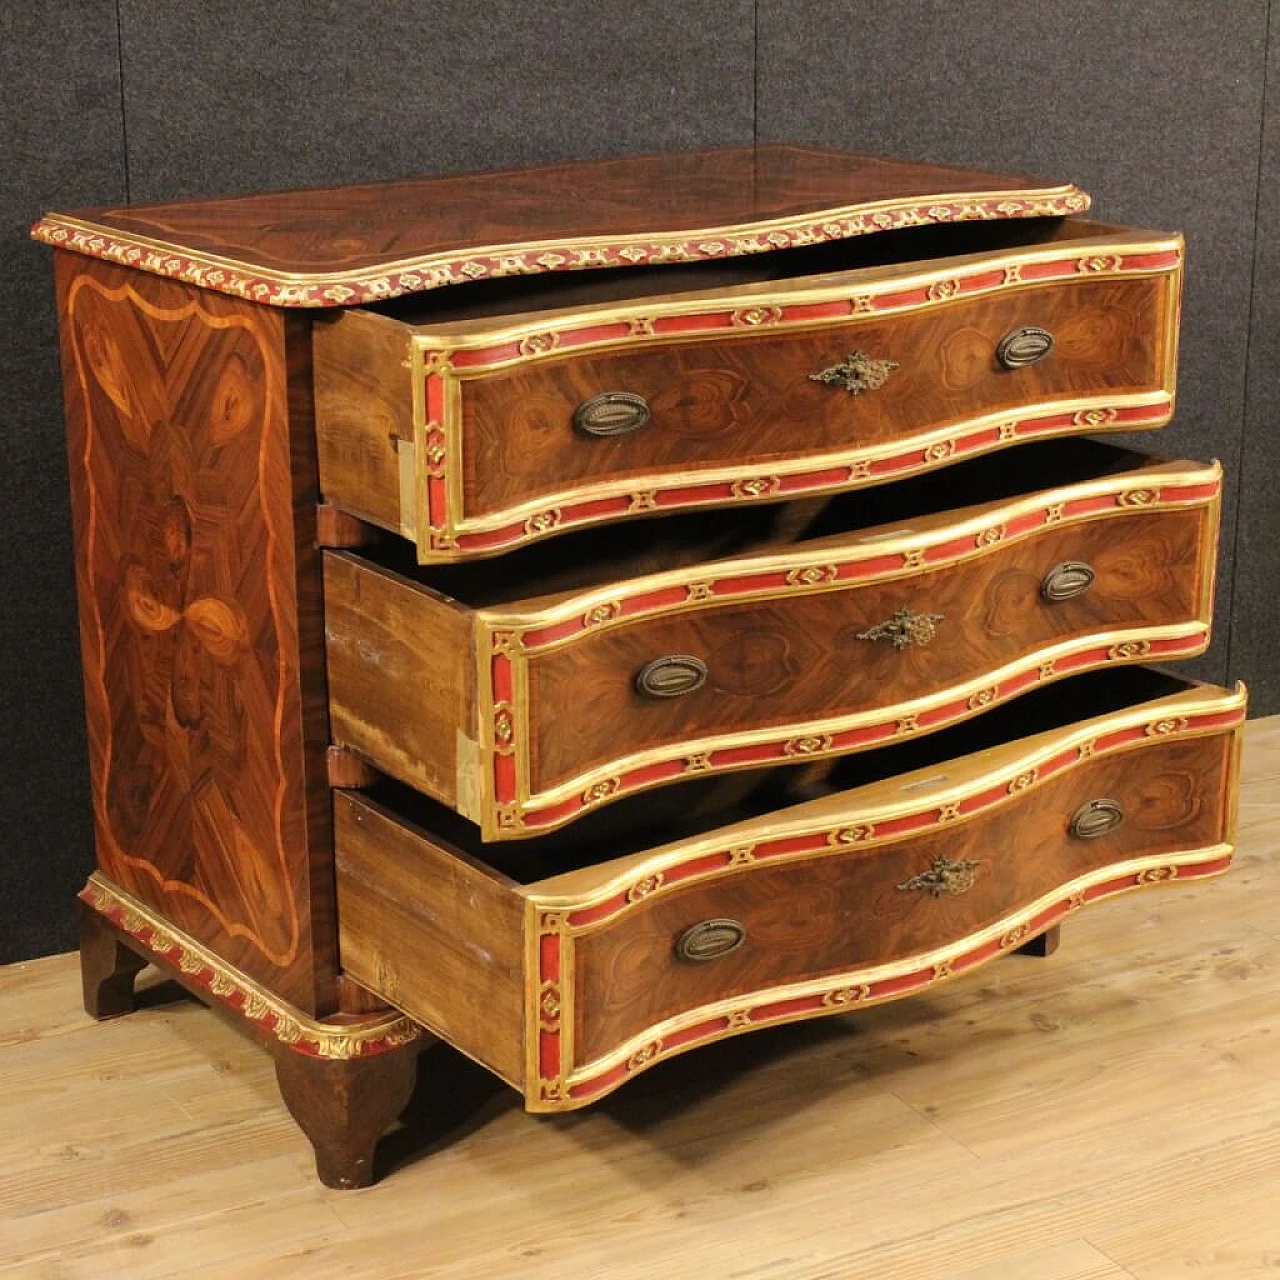 Genoese inlaid, lacquered and gilded wood dresser 11